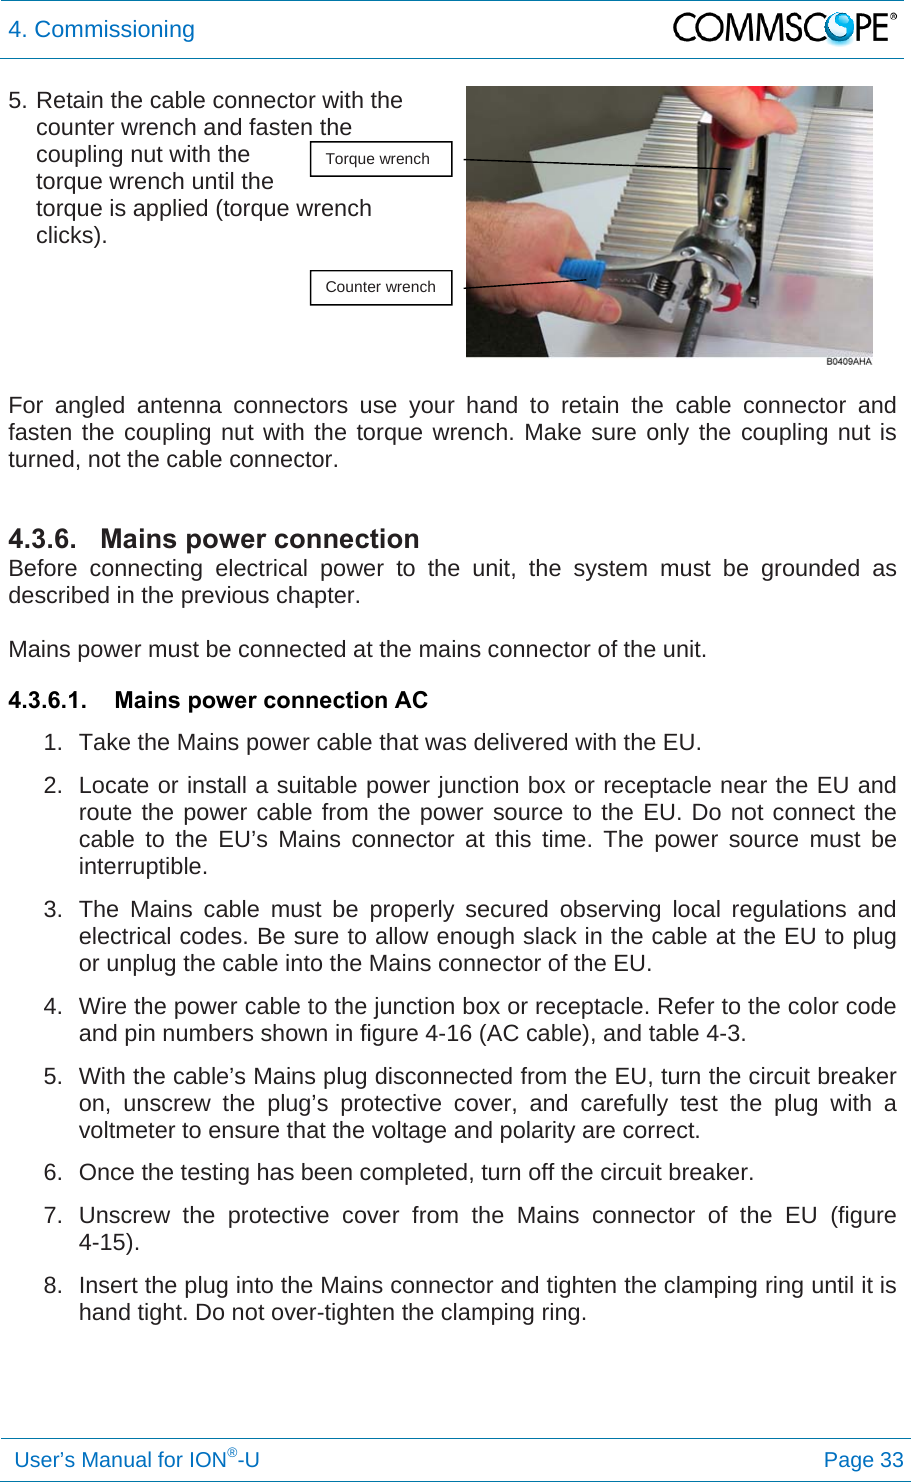 4. Commissioning   User’s Manual for ION®-U Page 33 5. Retain the cable connector with the counter wrench and fasten the coupling nut with the torque wrench until the  torque is applied (torque wrench clicks).   For angled antenna connectors use your hand to retain the cable connector and fasten the coupling nut with the torque wrench. Make sure only the coupling nut is turned, not the cable connector.  4.3.6. Mains power connection Before connecting electrical power to the unit, the system must be grounded as described in the previous chapter.  Mains power must be connected at the mains connector of the unit. 4.3.6.1.  Mains power connection AC 1.  Take the Mains power cable that was delivered with the EU. 2.  Locate or install a suitable power junction box or receptacle near the EU and route the power cable from the power source to the EU. Do not connect the cable to the EU’s Mains connector at this time. The power source must be interruptible. 3.  The Mains cable must be properly secured observing local regulations and electrical codes. Be sure to allow enough slack in the cable at the EU to plug or unplug the cable into the Mains connector of the EU. 4.  Wire the power cable to the junction box or receptacle. Refer to the color code and pin numbers shown in figure 4-16 (AC cable), and table 4-3. 5.  With the cable’s Mains plug disconnected from the EU, turn the circuit breaker on, unscrew the plug’s protective cover, and carefully test the plug with a voltmeter to ensure that the voltage and polarity are correct. 6.  Once the testing has been completed, turn off the circuit breaker. 7. Unscrew the protective cover from the Mains connector of the EU (figure 4-15). 8.  Insert the plug into the Mains connector and tighten the clamping ring until it is hand tight. Do not over-tighten the clamping ring.   Torque wrench Counter wrench 